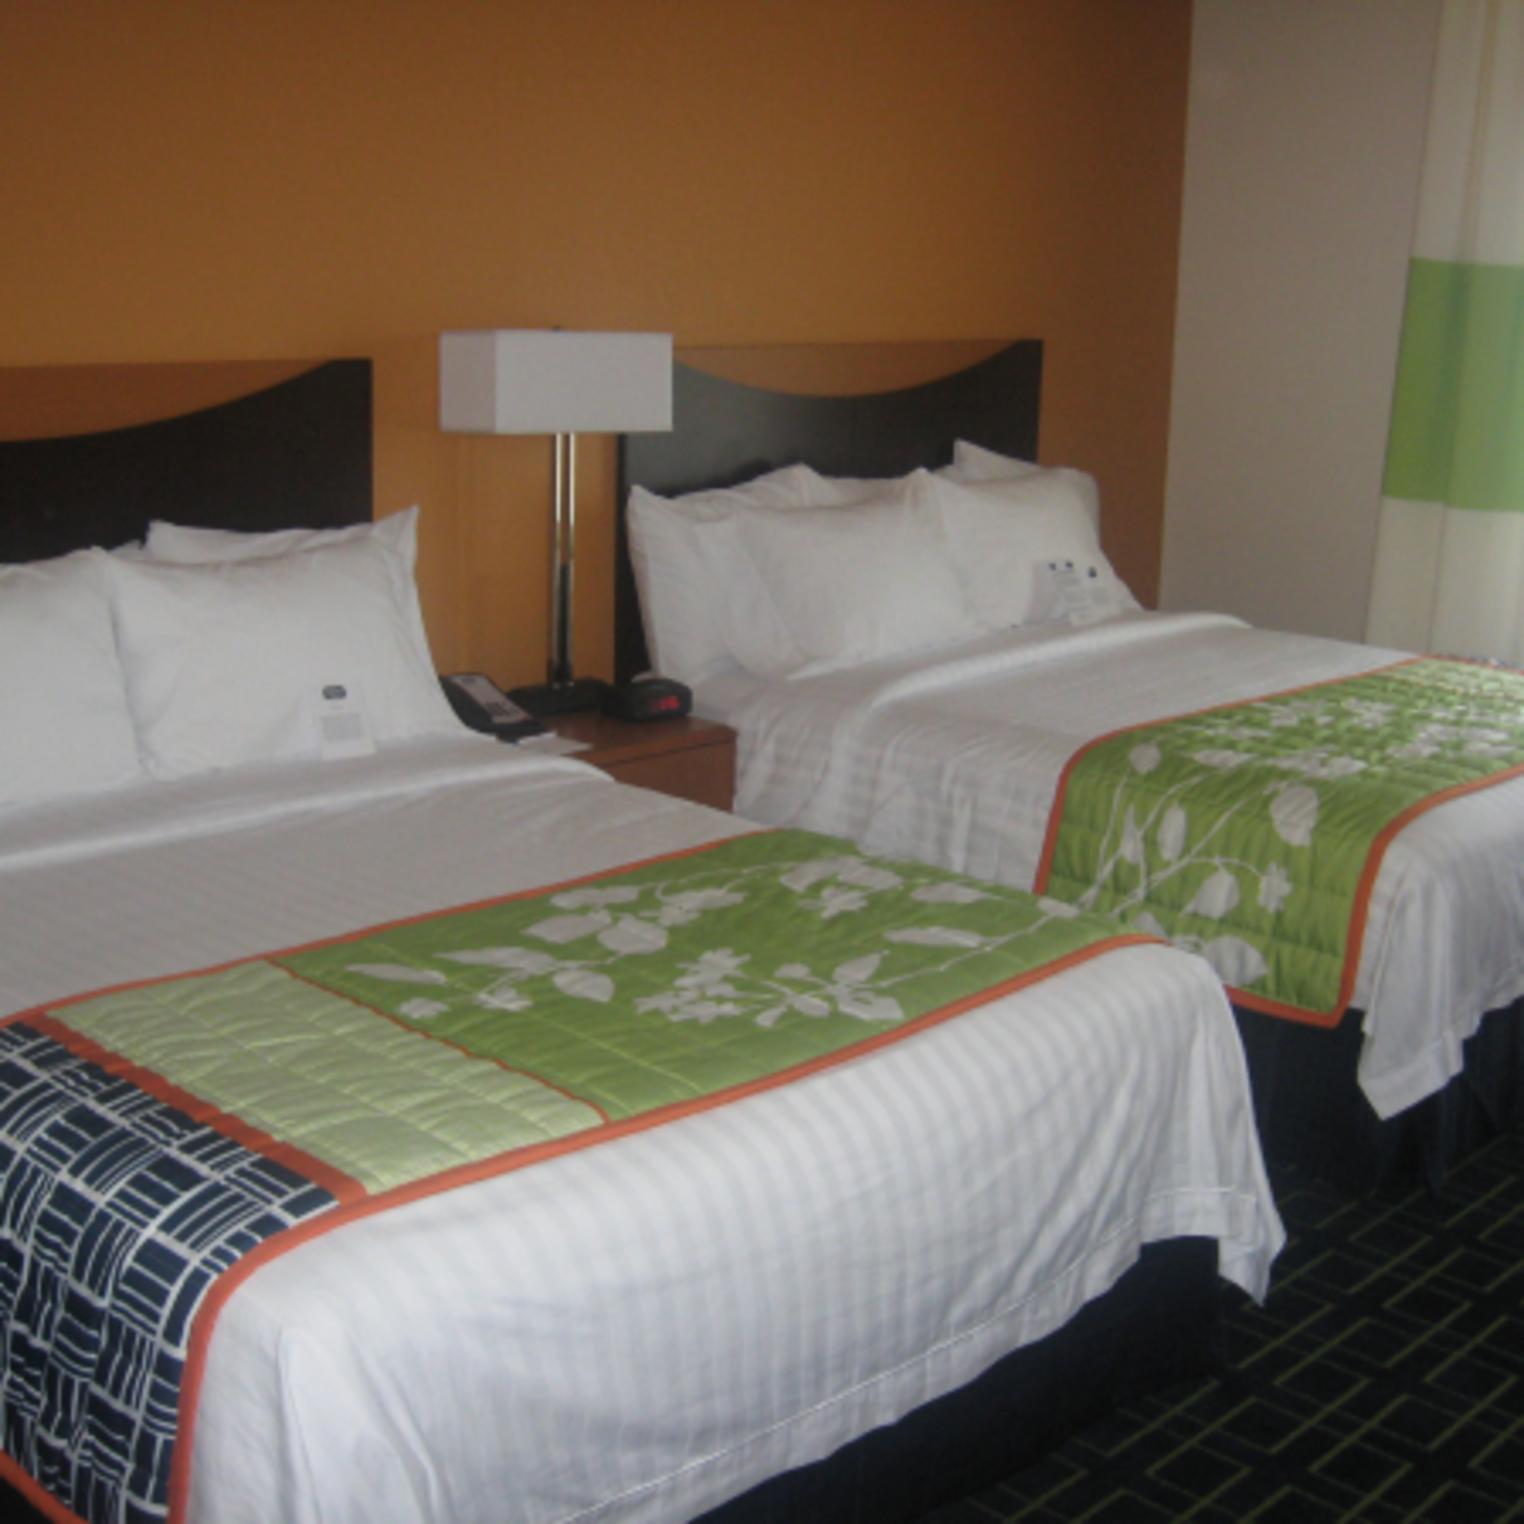 Fairfield Inn & Suites Carlisle double bed accommodations